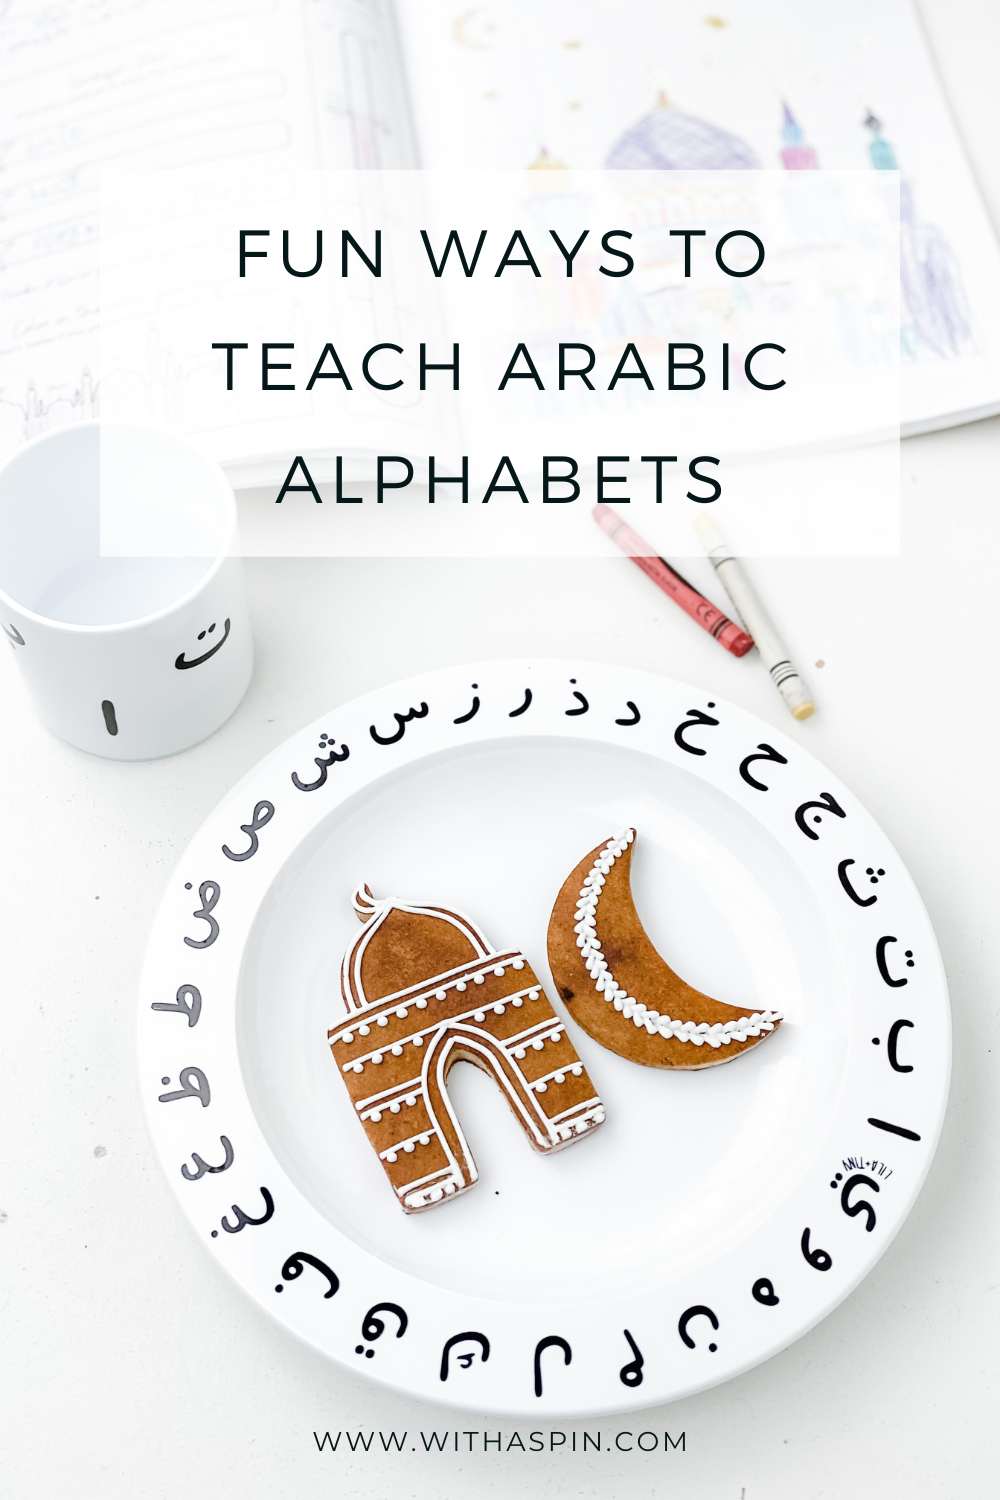 https://withaspin.com/wp-content/uploads/2022/12/Fun-Ways-to-Teach-Arabic-Alphabets-WithASpin.png